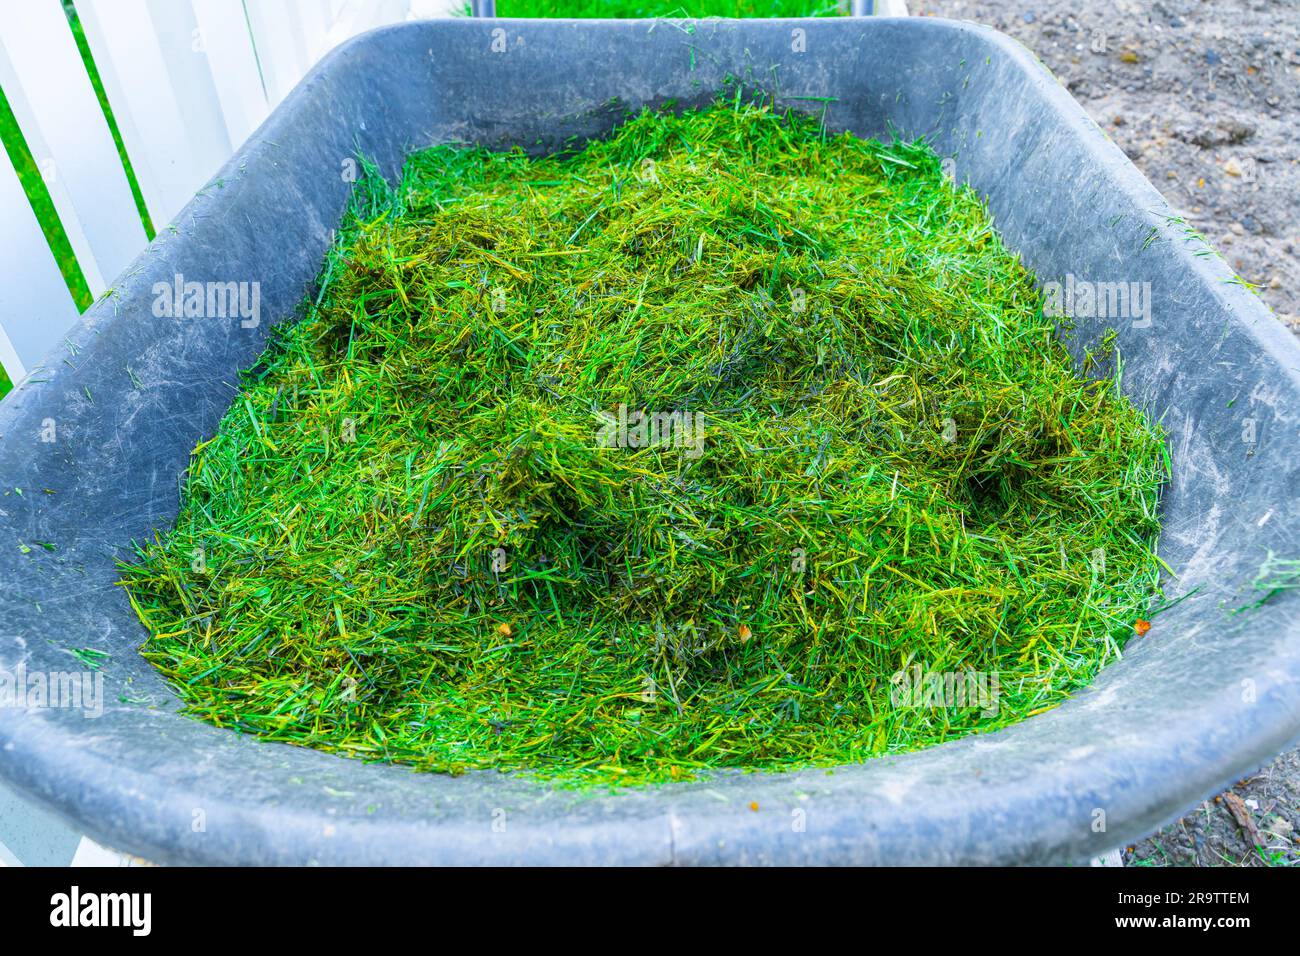 The garden wheelbarrow is filled with lawn cut grass for use as organic mulch. Rational use of resources in a private suburban area. Recycling waste f Stock Photo